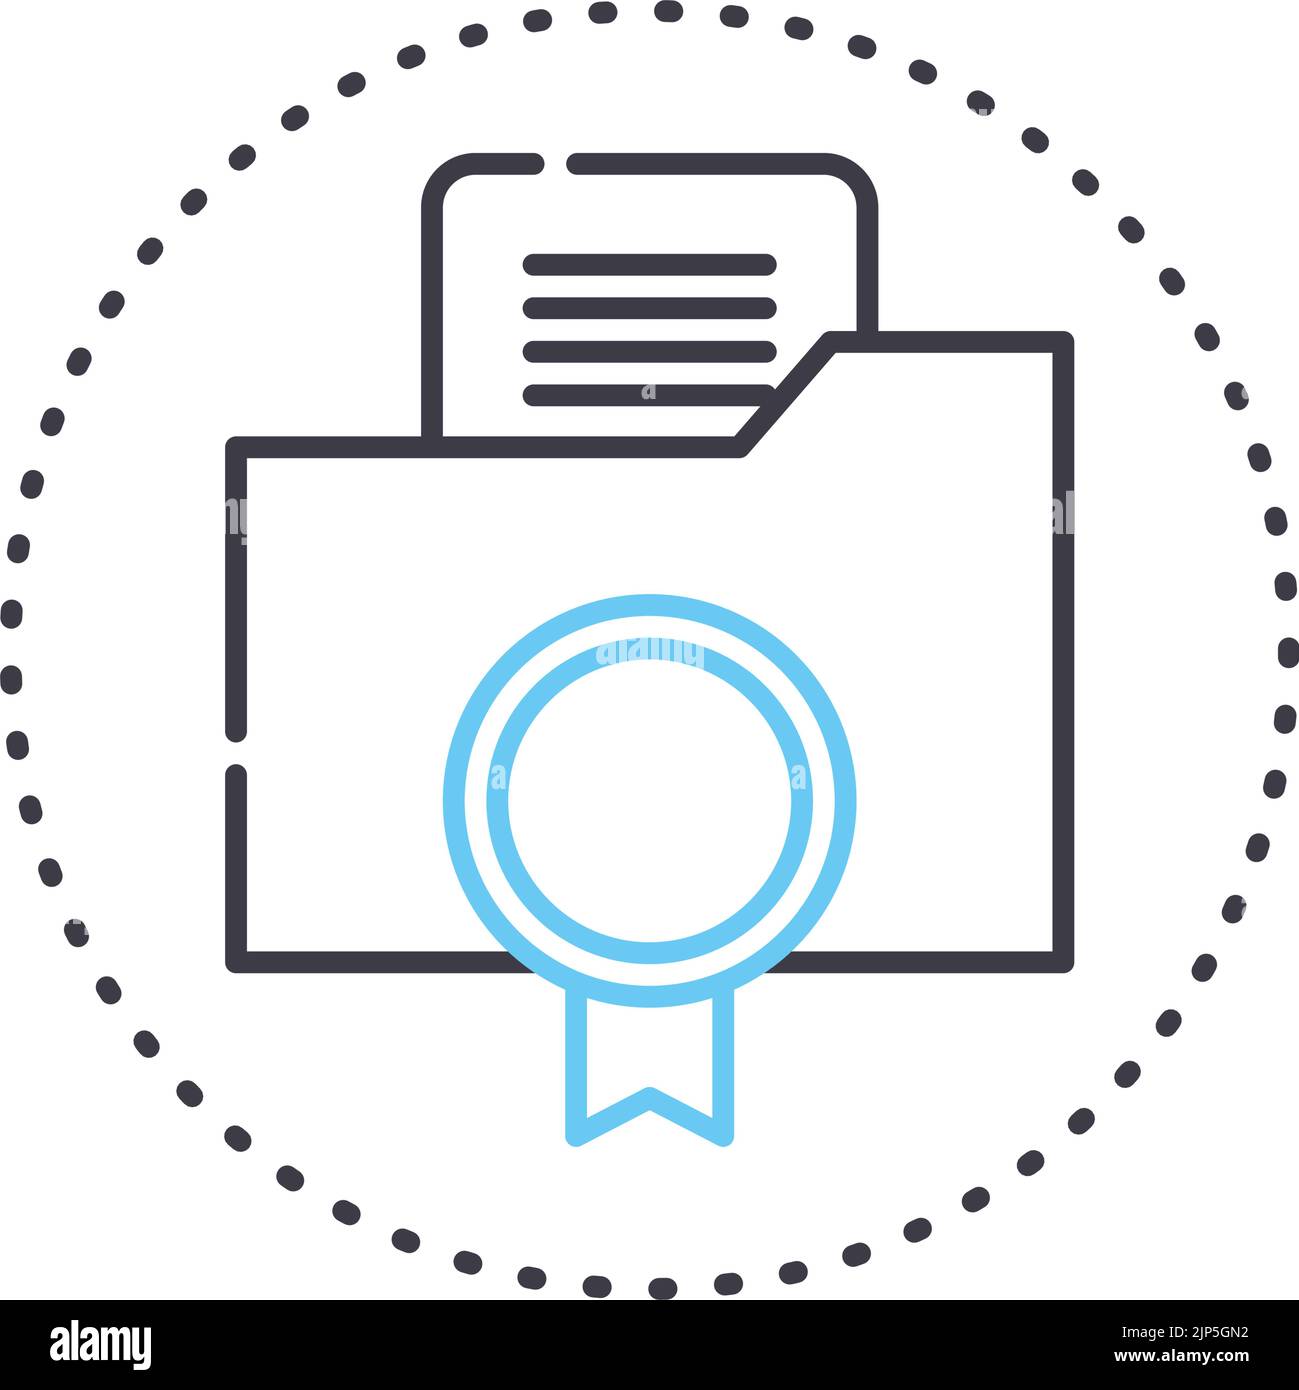 data quality line icon, outline symbol, vector illustration, concept sign Stock Vector